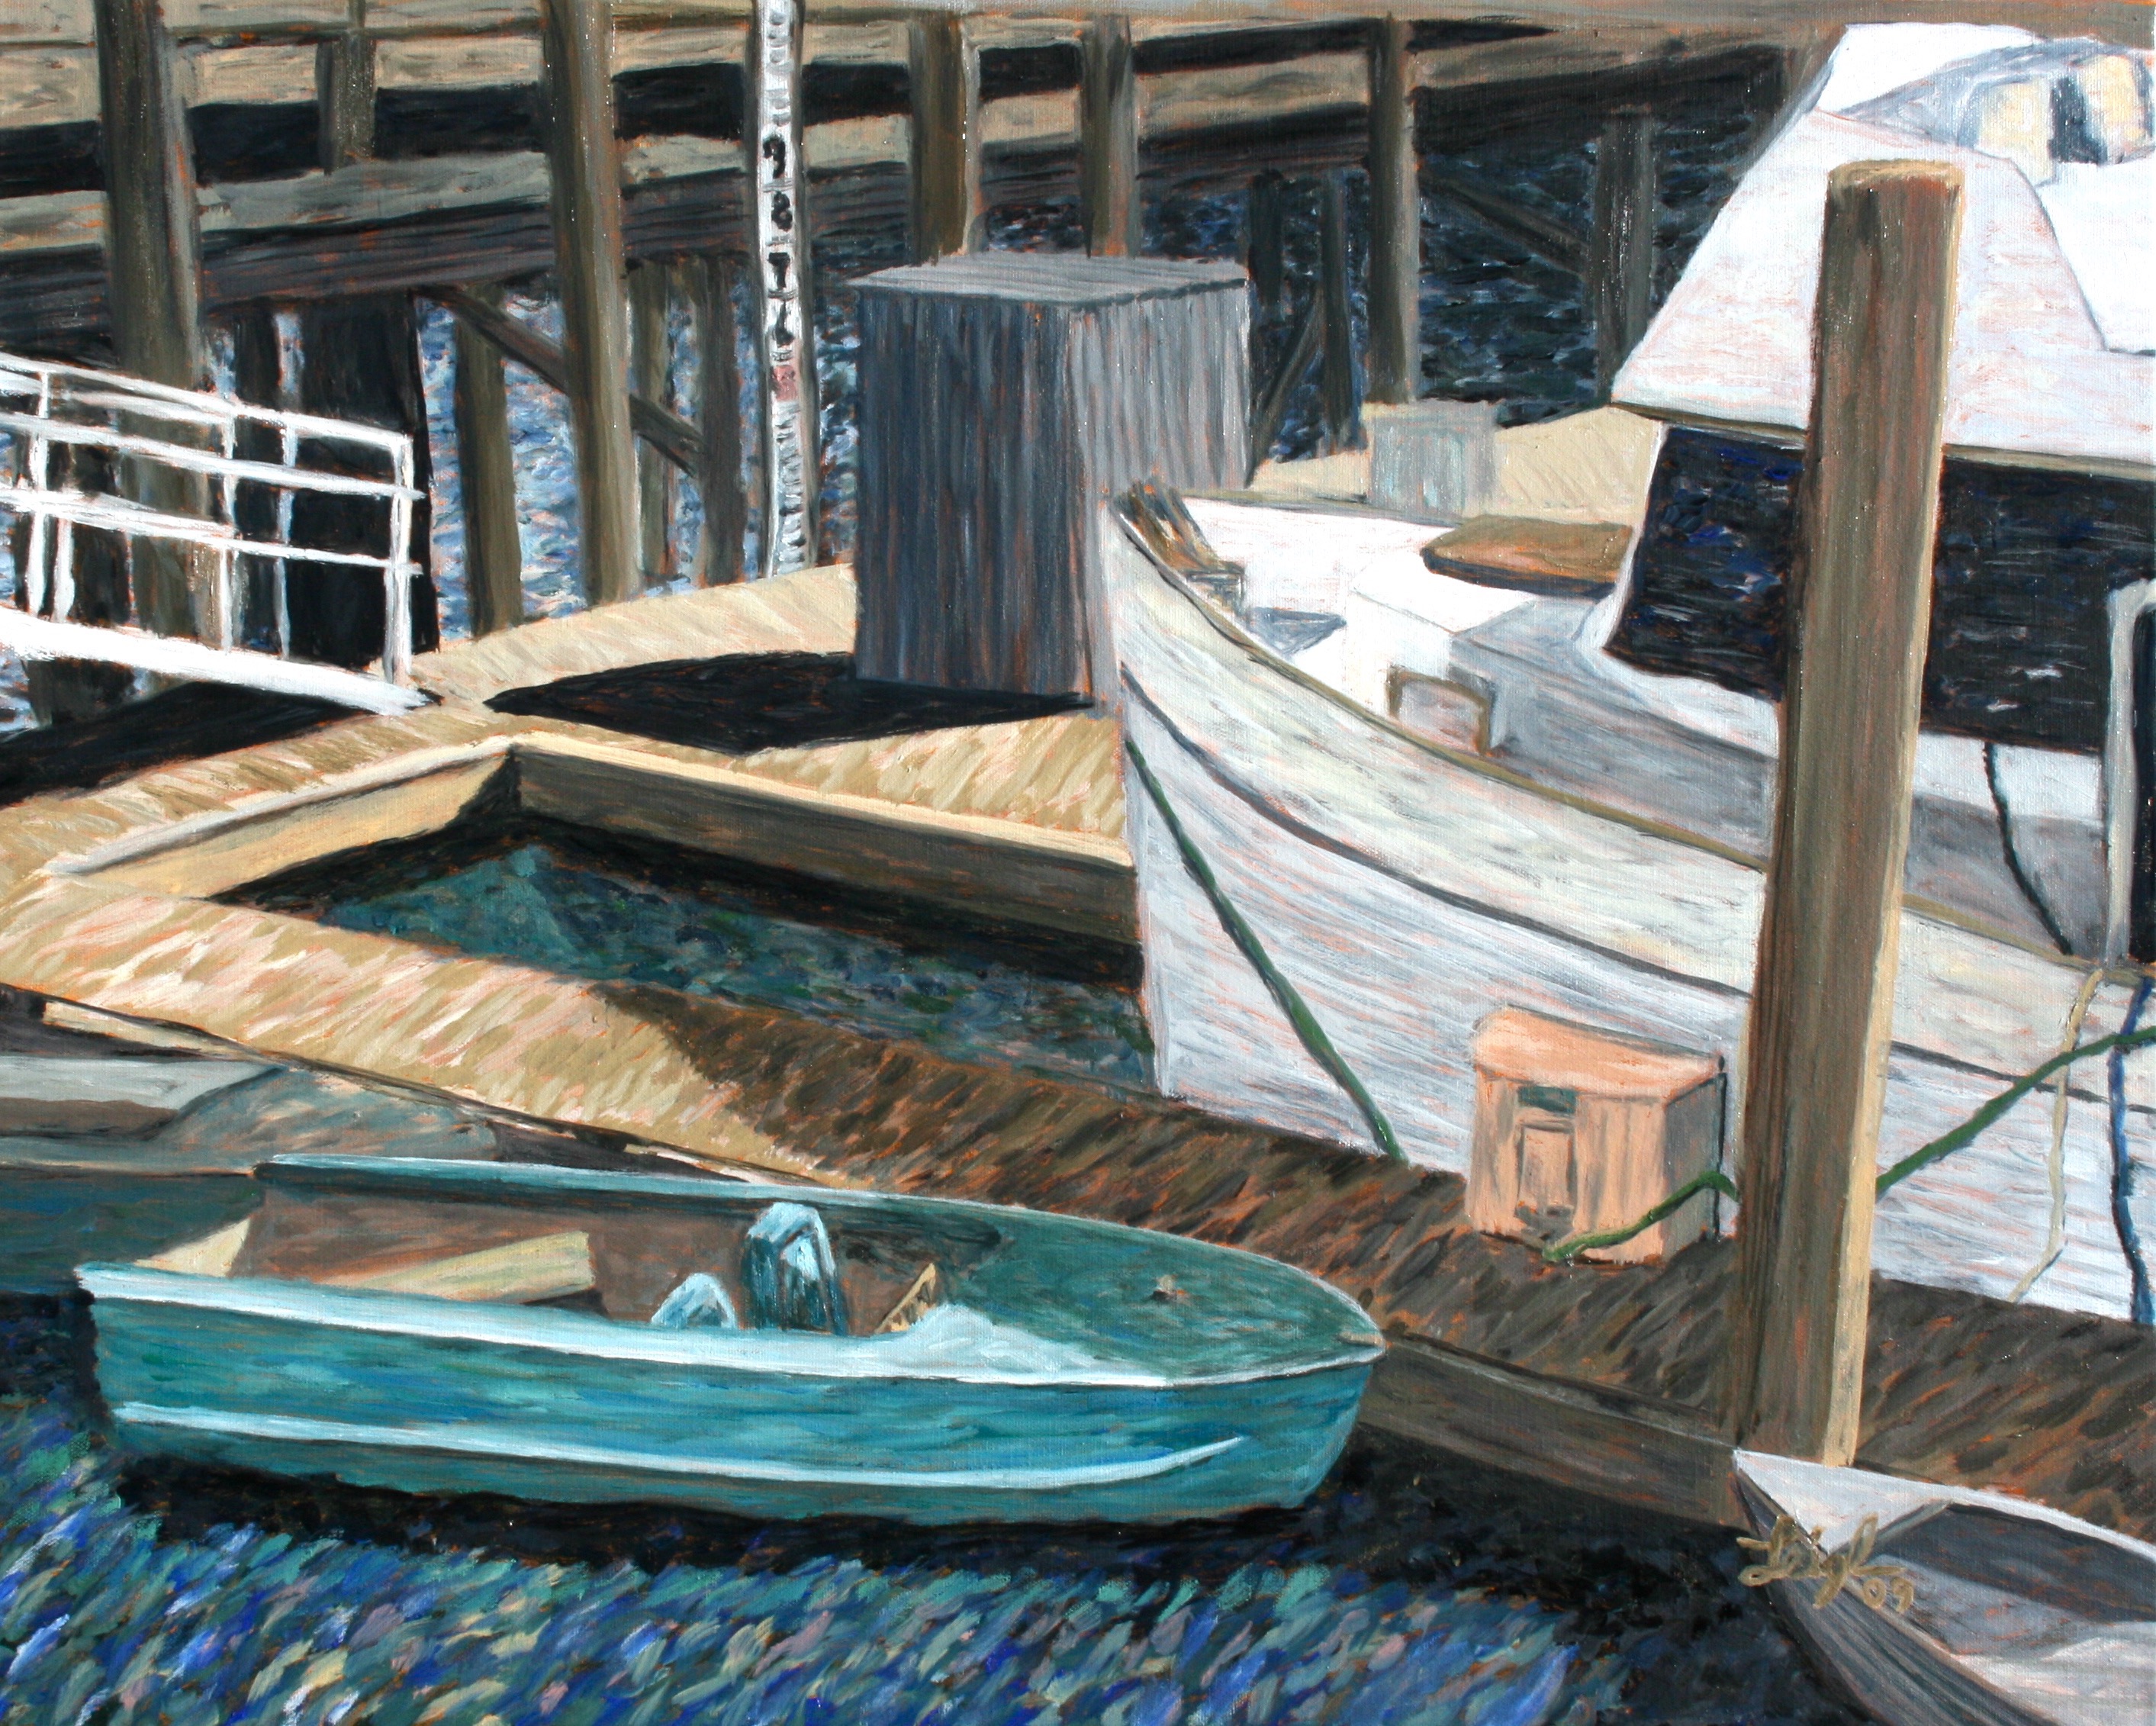 Dinghy at the Dock  ~  
Cate Baker-Pitts, New York, NY
2009 • 30 x 24